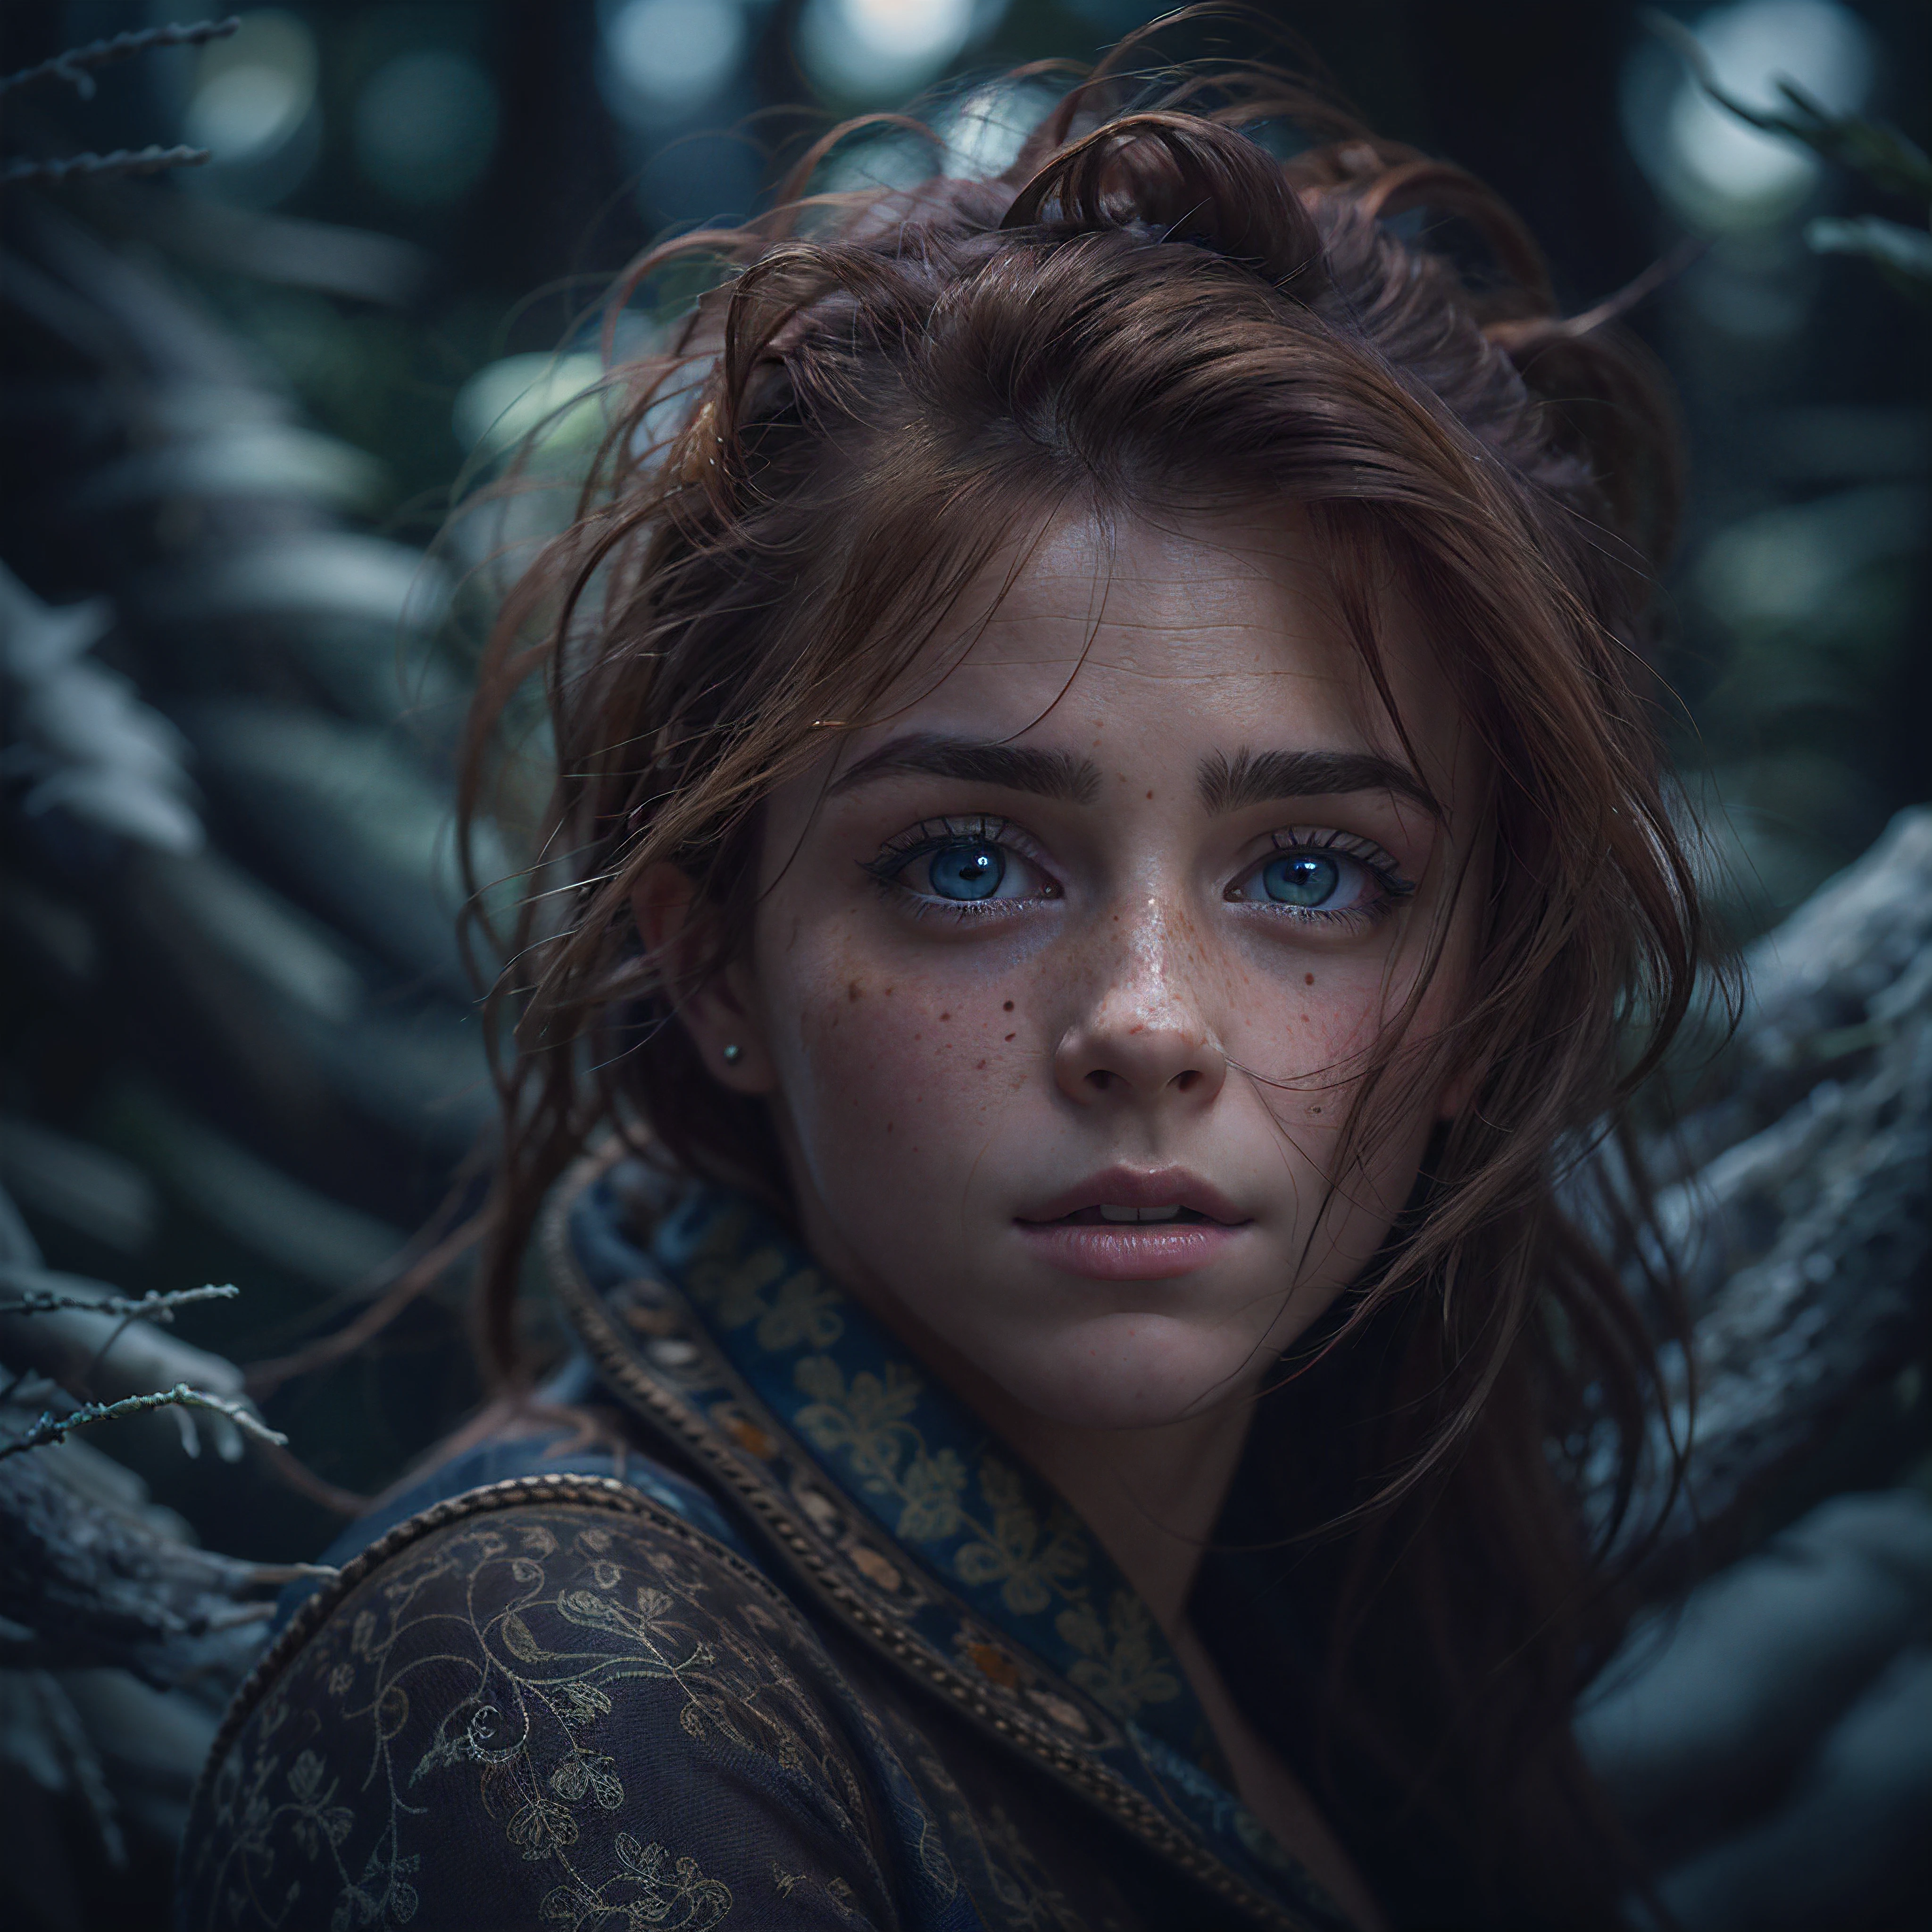 portrait of beautiful women, looking over spruce forest, moody portrait, striking features, beauty, intricate details, dramatic composition, tension, wispy hair, blue eyes, contrast, texture, realism, high-quality rendering, stunning art, high quality, film grain, Fujifilm XT3, acne, blemishes, detailed skin, freckled